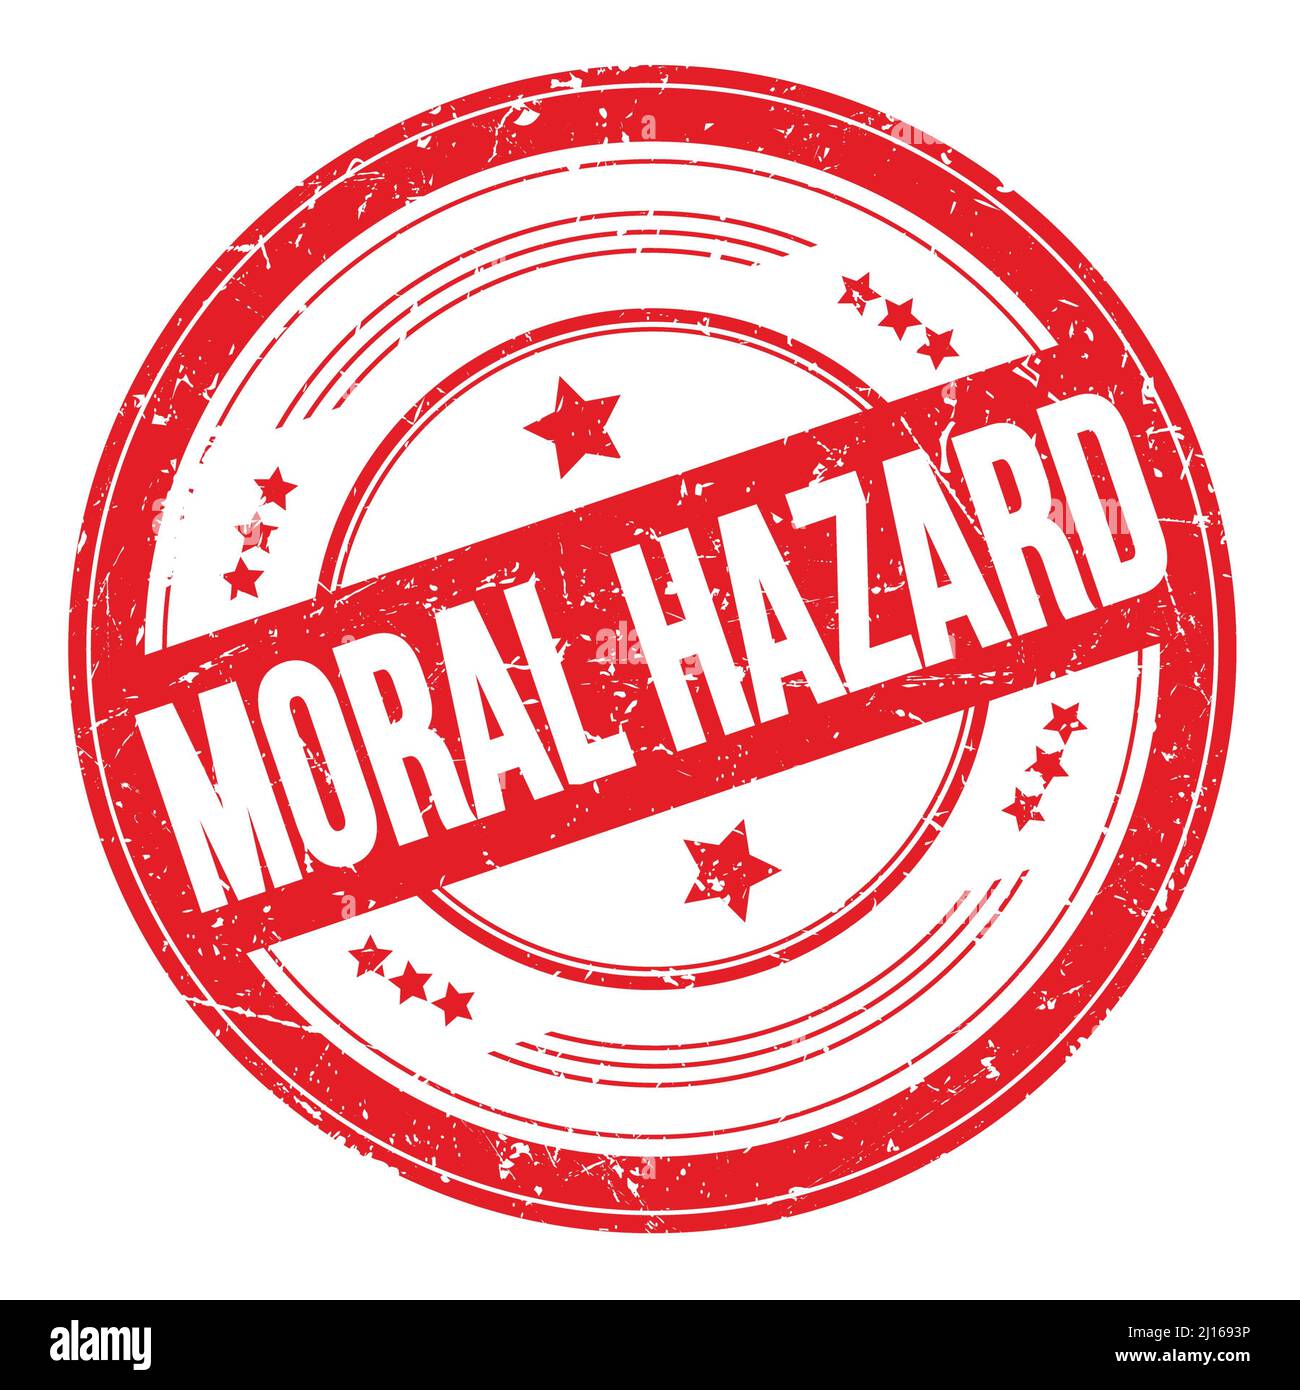 MORAL HAZARD text on red round grungy texture stamp. Stock Photo